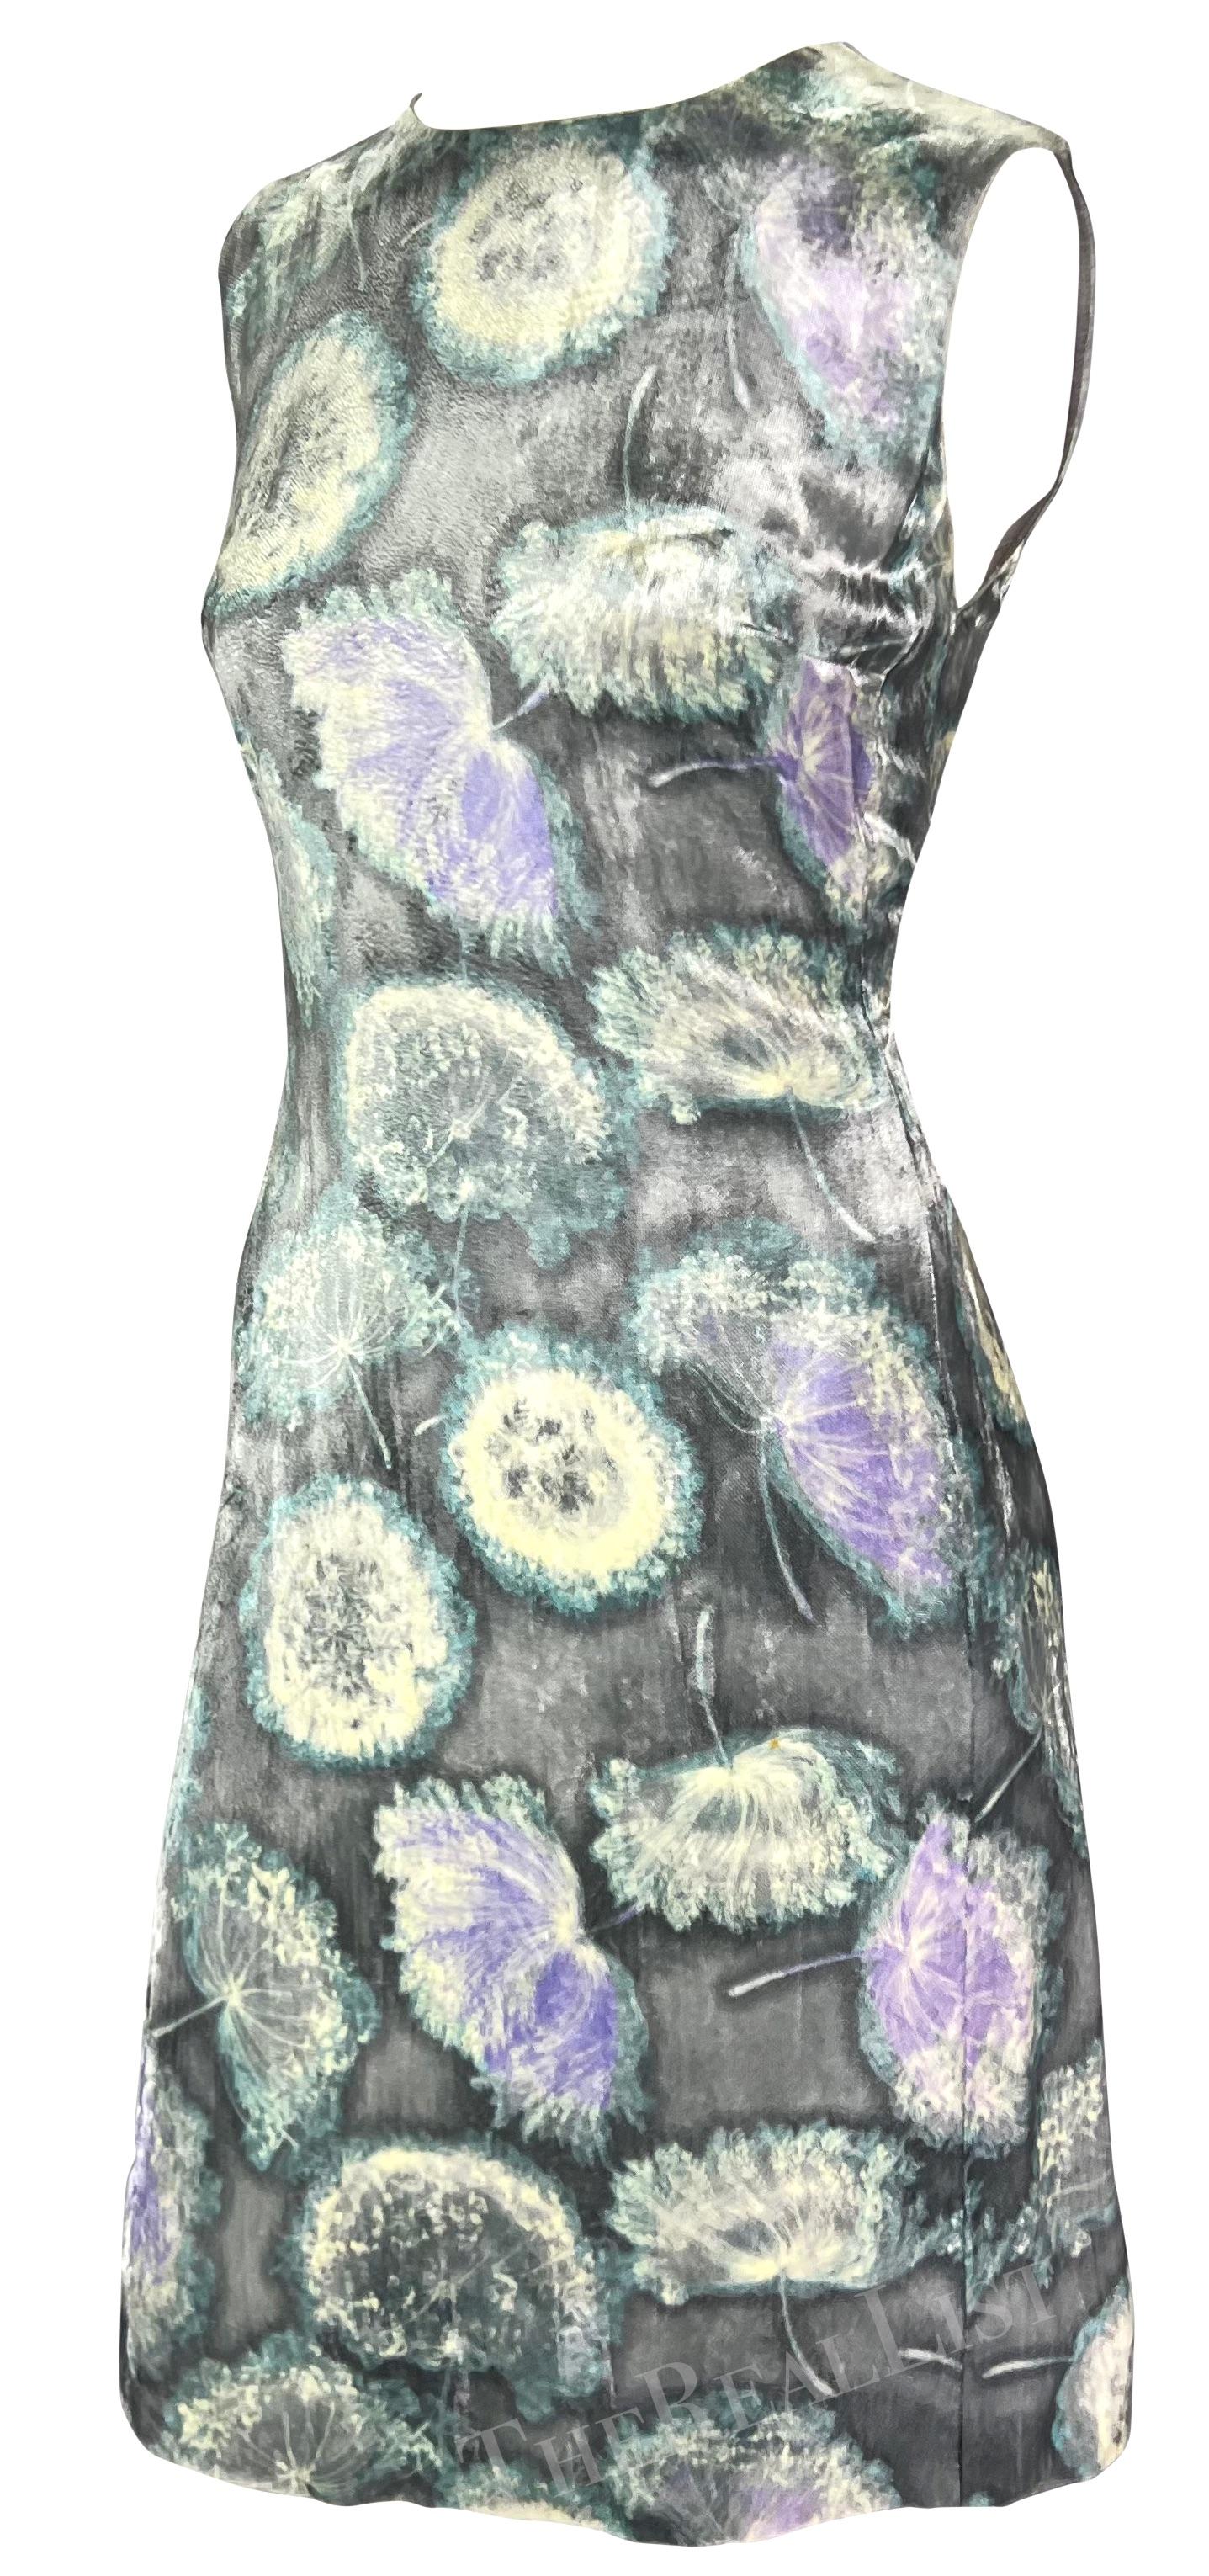 Presenting a fabulous silver dandelion print Gianni Versace dress, designed by Gianni Versace. From the Spring/Summer 1997 collection, this dress is constructed entirely of shimmery silver velvet with a bold dandelion print. A classic crew neckline